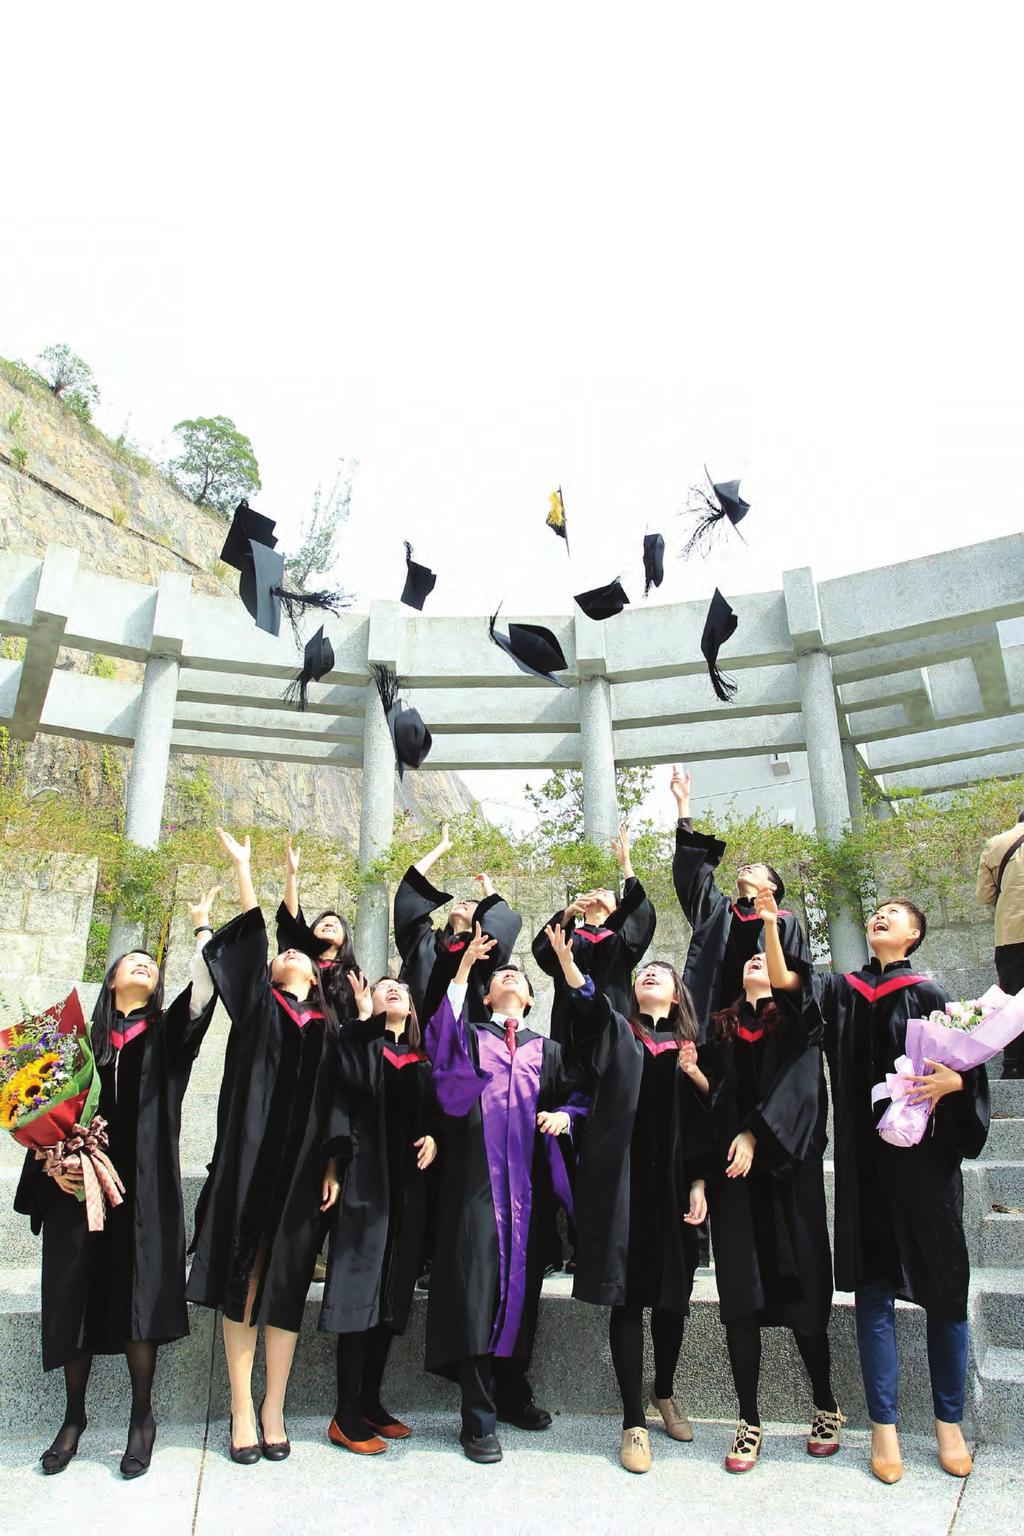 GENERAL ADMISSION REQUIREMENTS CUHK s minimum admission requirements for postgraduate programmes are as follows: Academic Requirements: (a) Doctoral Programmes: A Master s degree from a recognized